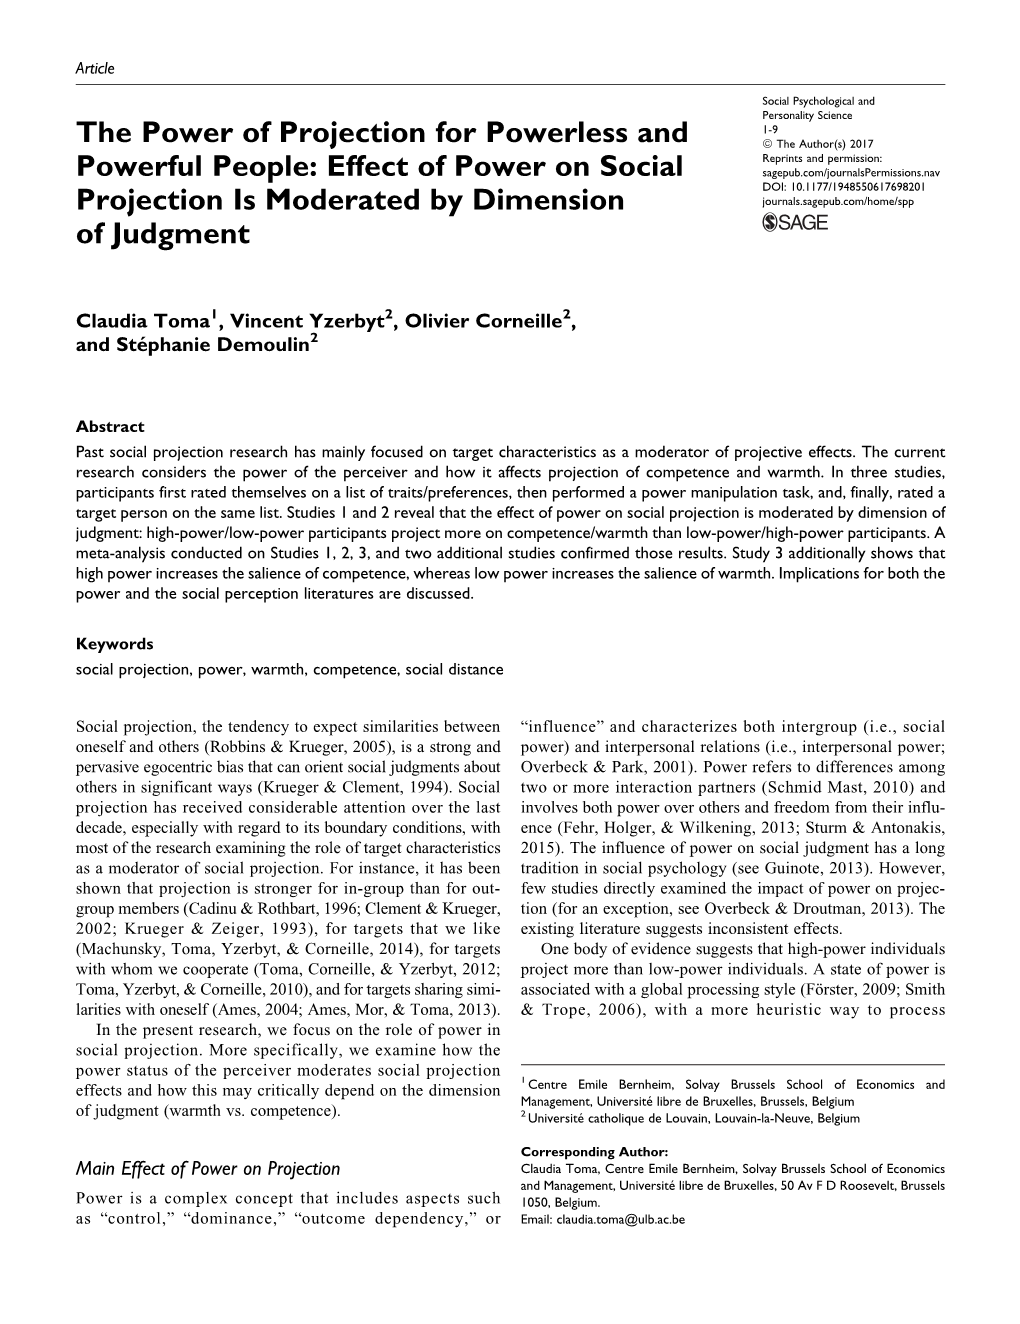 Effect of Power on Social Projection Is Moderated by Dimension Of